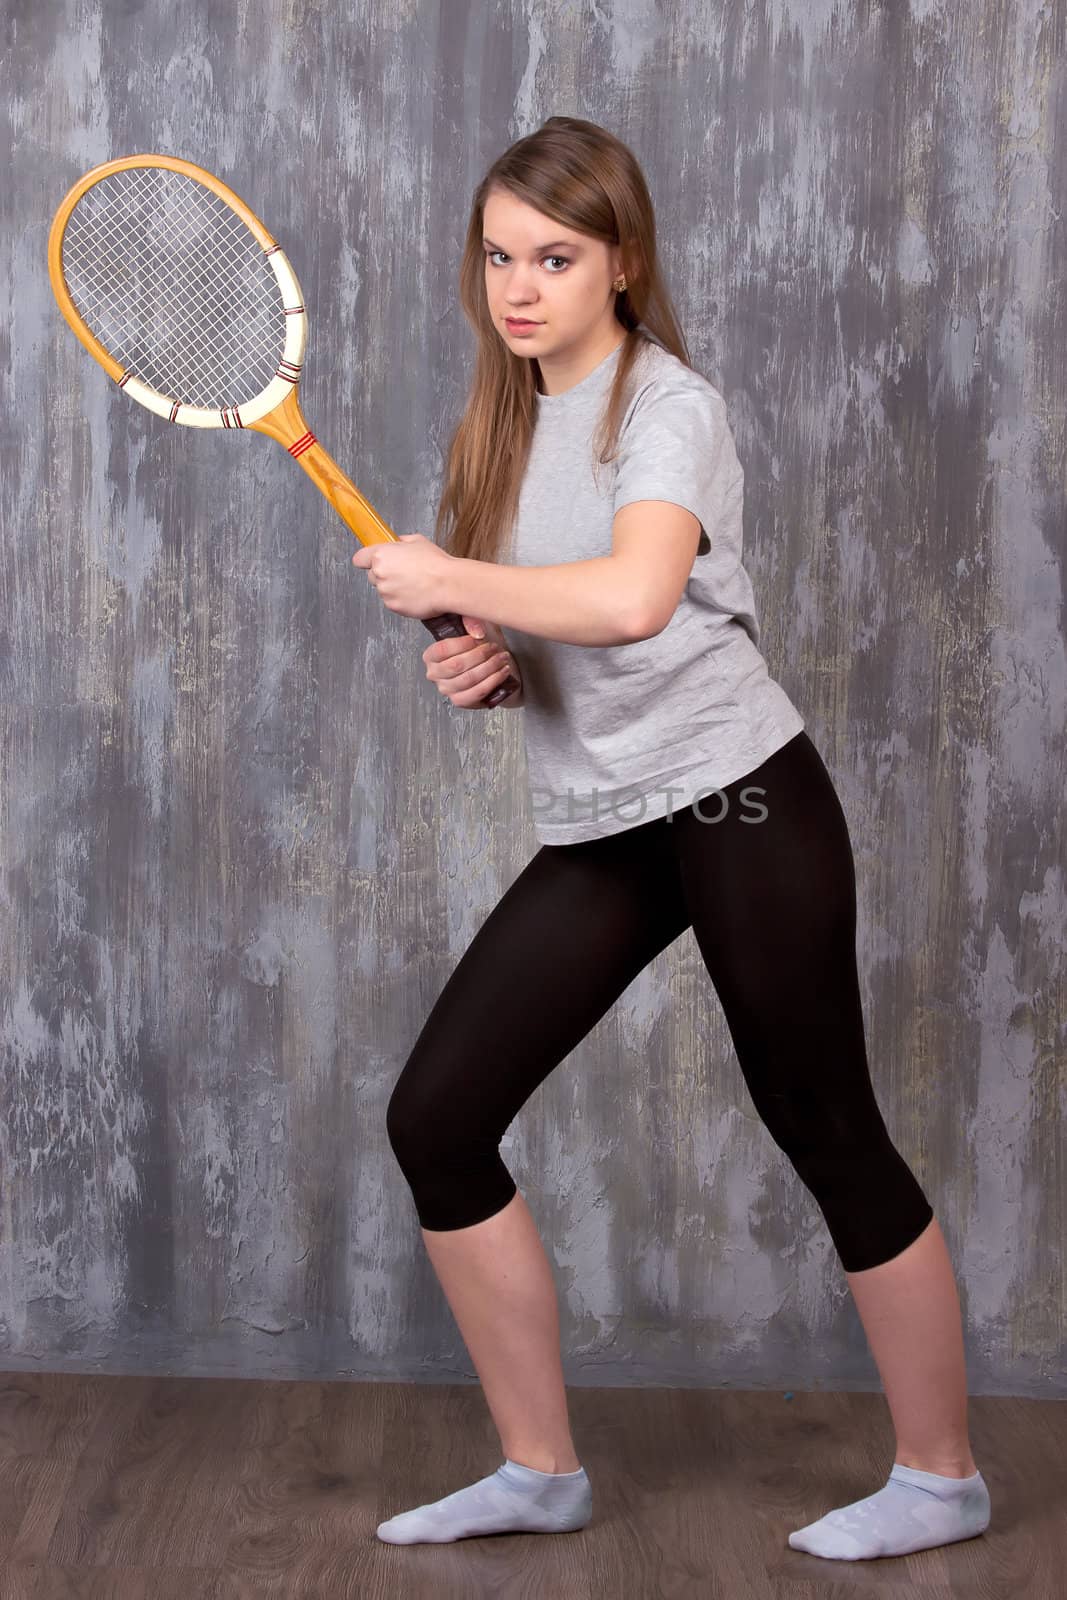  girl with tennis racket by victosha